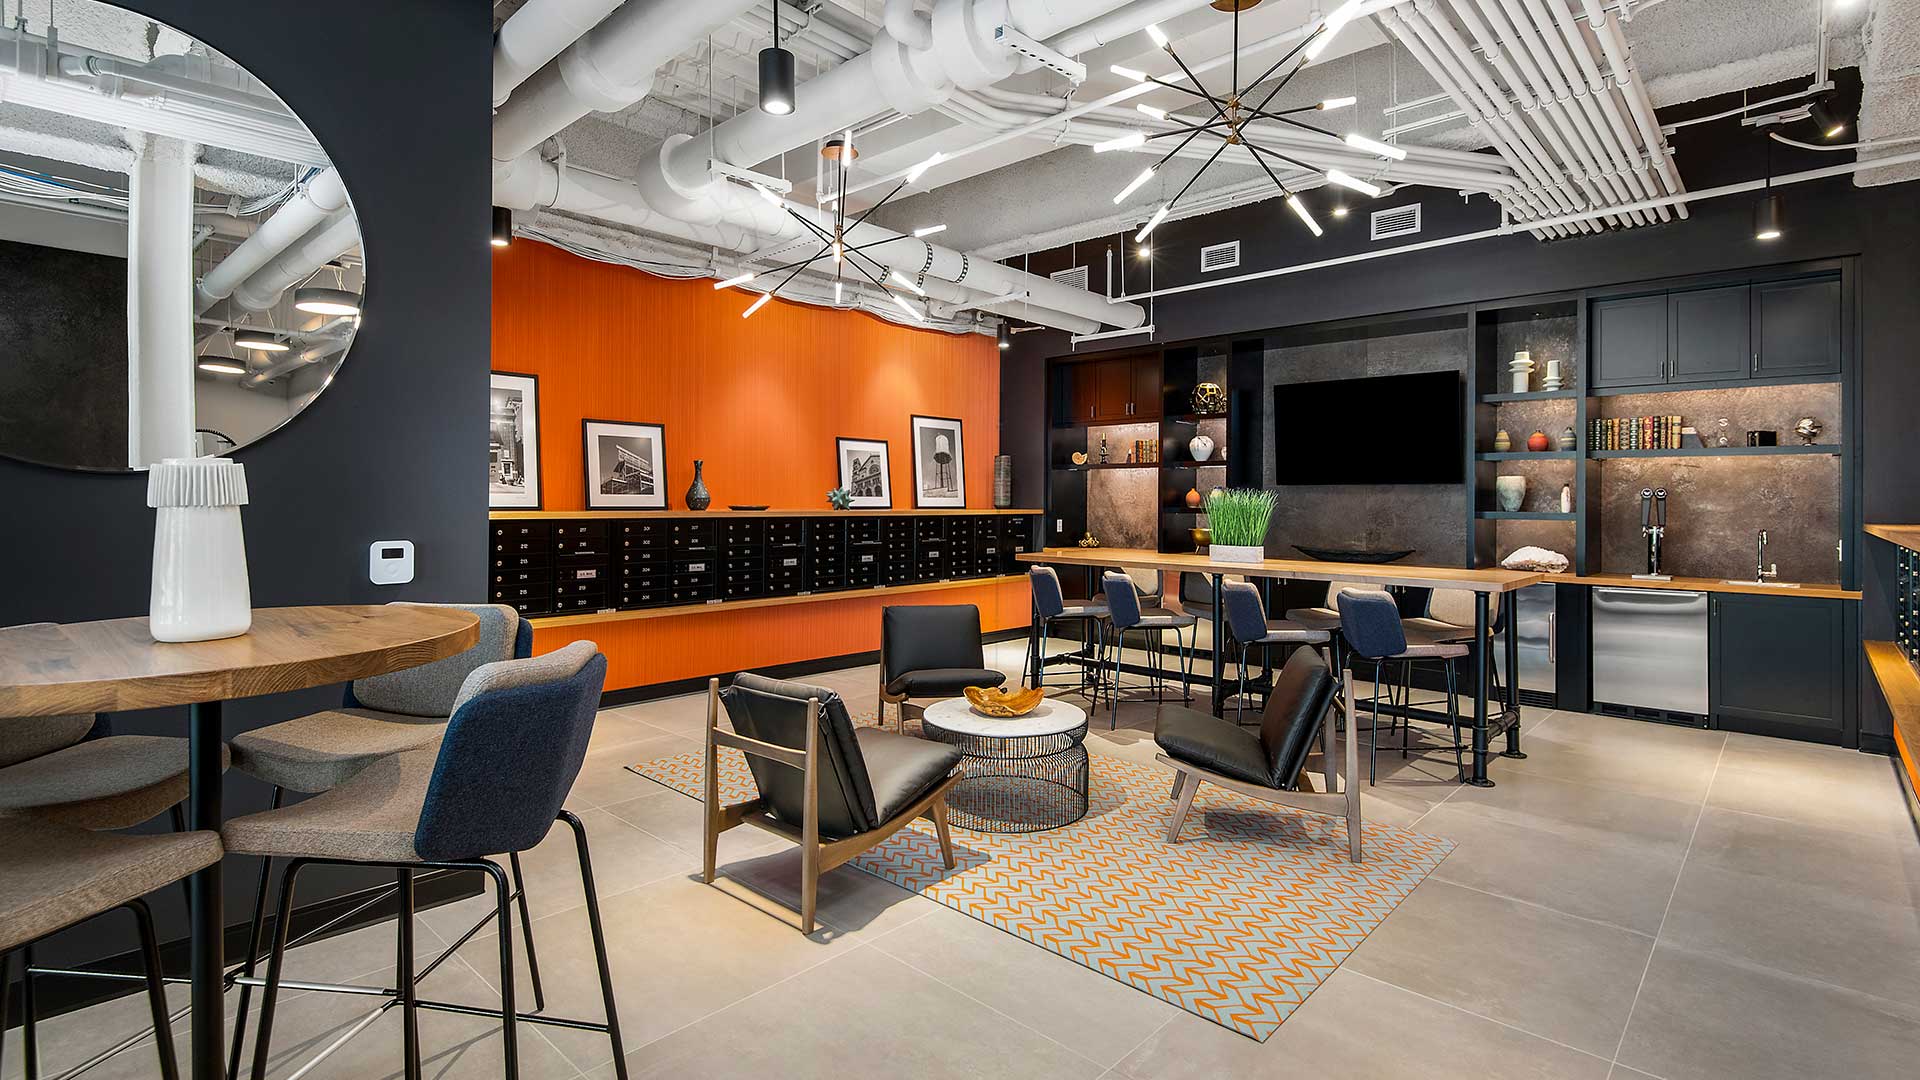 Looking in to the Clubroom at Wrigleyville Lofts. There are club chairs in a circle ahead with a high-top table behind. The far wall has a mounted television with beer taps beside. The side walls are orange with mailboxes built-in for residents.